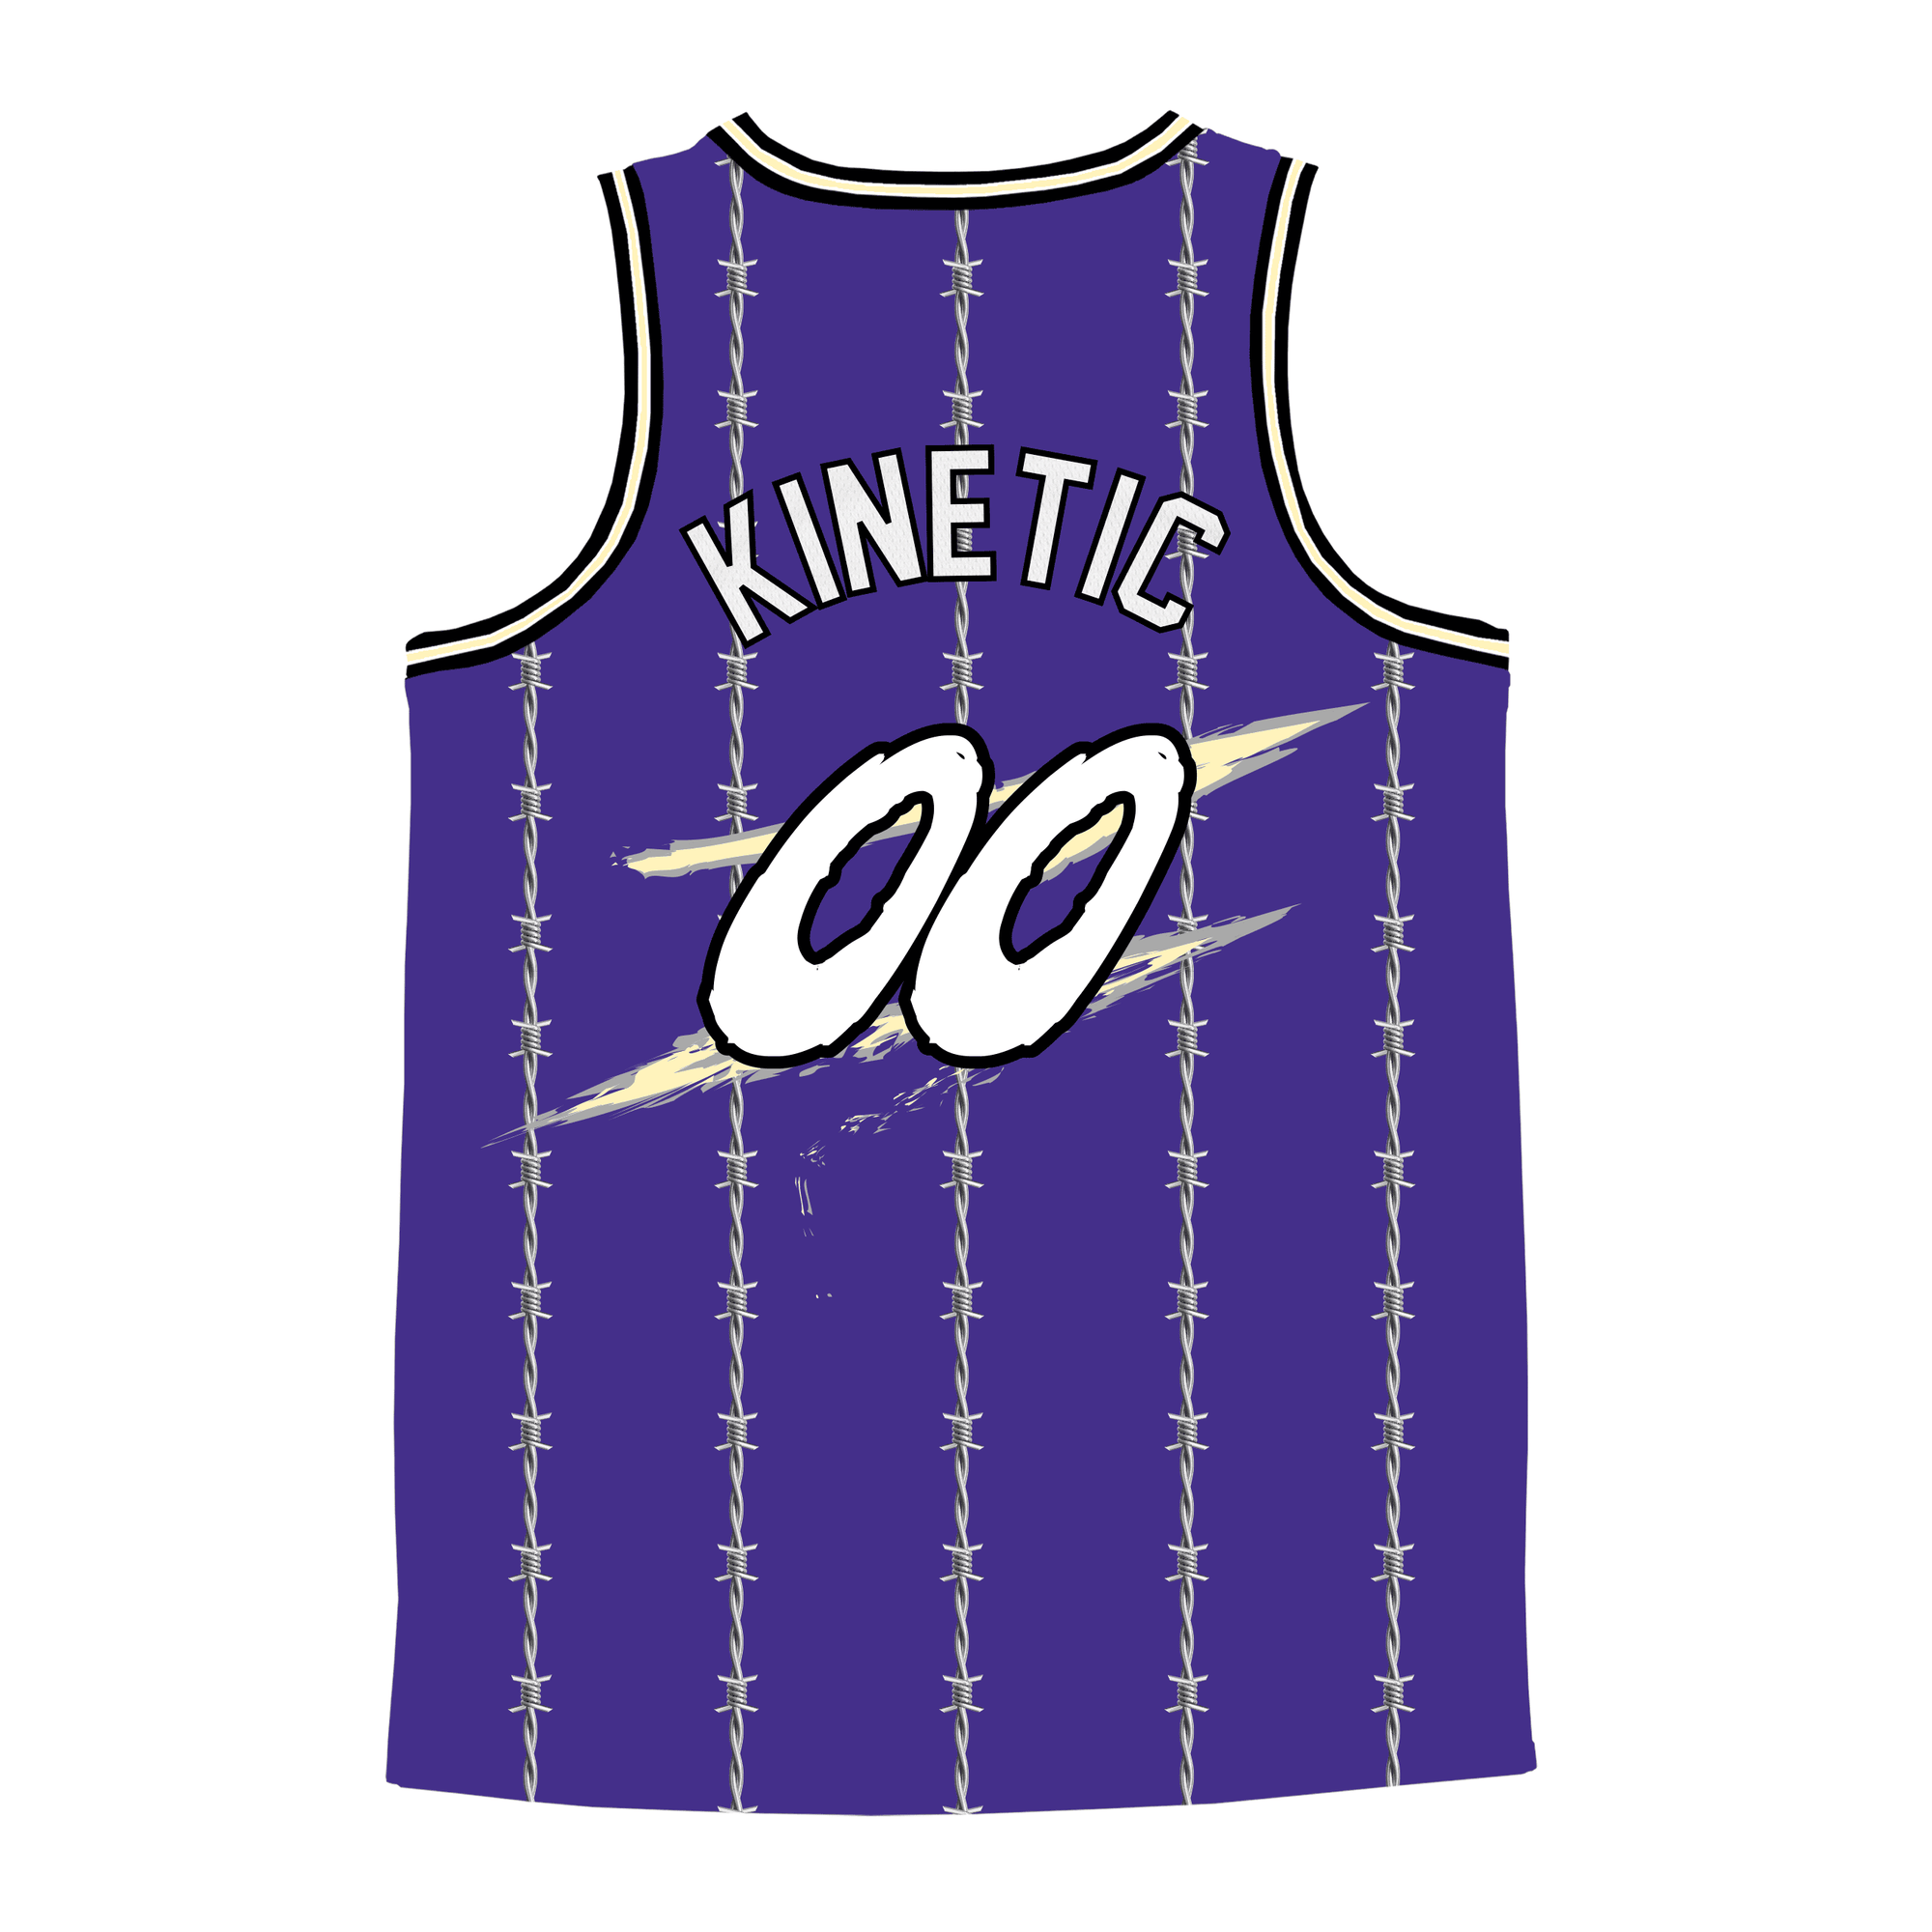 Delta Sigma Phi - Barbed Wire Basketball Jersey